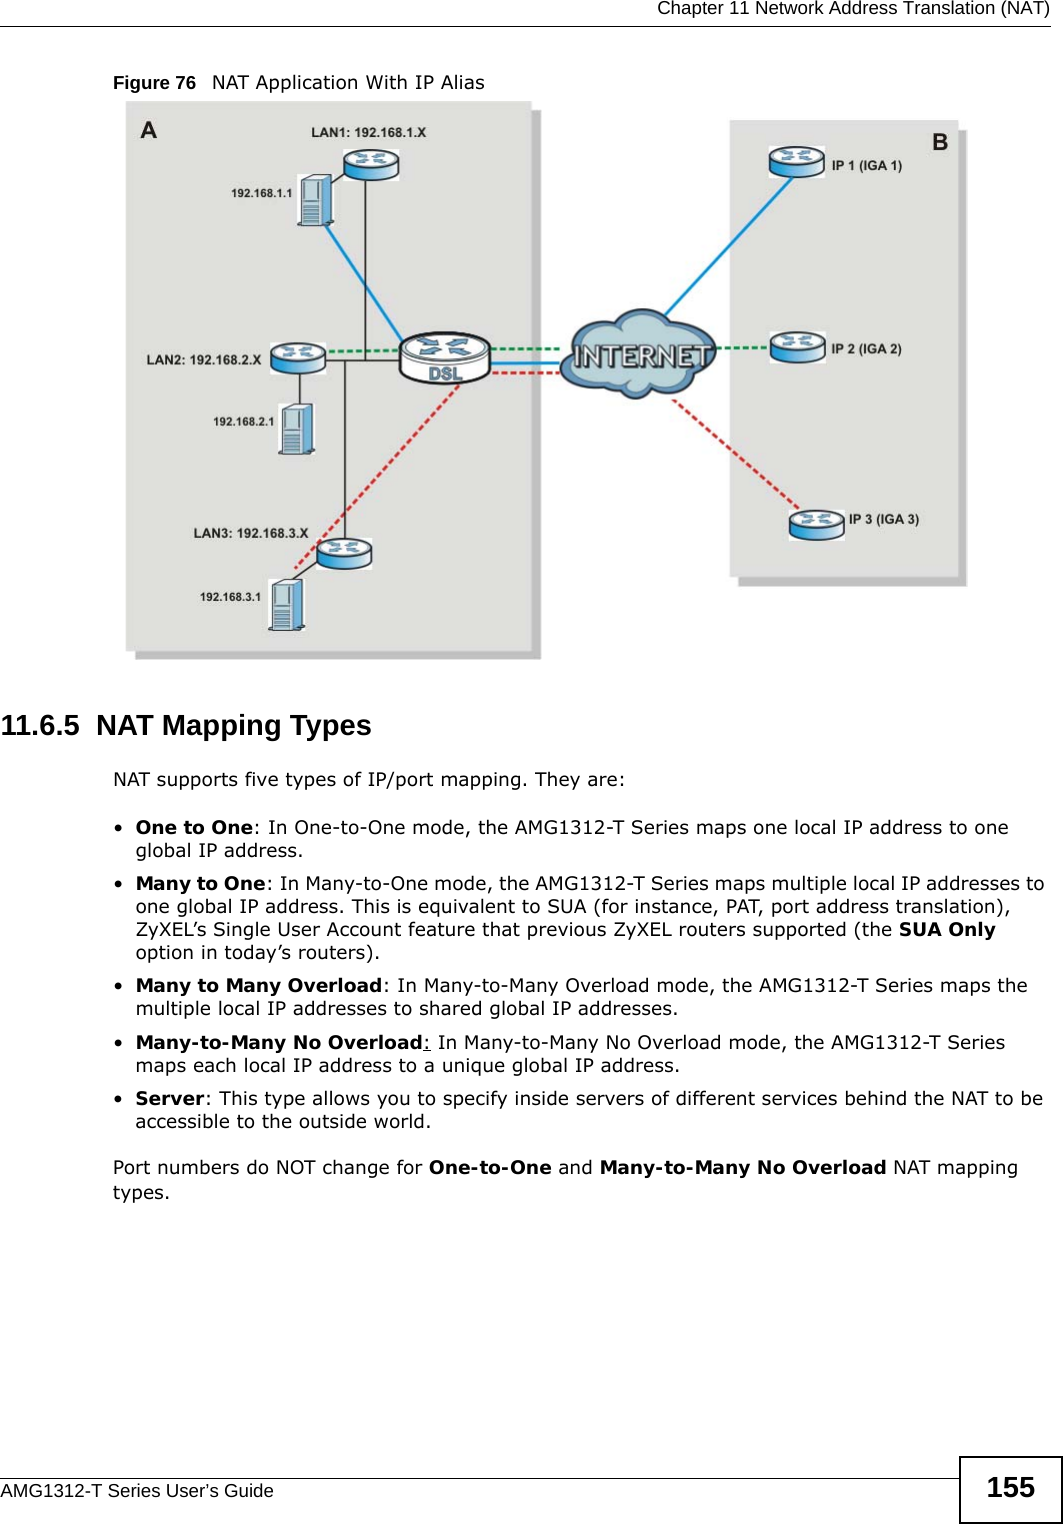  Chapter 11 Network Address Translation (NAT)AMG1312-T Series User’s Guide 155Figure 76   NAT Application With IP Alias11.6.5  NAT Mapping TypesNAT supports five types of IP/port mapping. They are:•One to One: In One-to-One mode, the AMG1312-T Series maps one local IP address to one global IP address.•Many to One: In Many-to-One mode, the AMG1312-T Series maps multiple local IP addresses to one global IP address. This is equivalent to SUA (for instance, PAT, port address translation), ZyXEL’s Single User Account feature that previous ZyXEL routers supported (the SUA Only option in today’s routers).•Many to Many Overload: In Many-to-Many Overload mode, the AMG1312-T Series maps the multiple local IP addresses to shared global IP addresses.•Many-to-Many No Overload: In Many-to-Many No Overload mode, the AMG1312-T Series maps each local IP address to a unique global IP address.•Server: This type allows you to specify inside servers of different services behind the NAT to be accessible to the outside world.Port numbers do NOT change for One-to-One and Many-to-Many No Overload NAT mapping types.